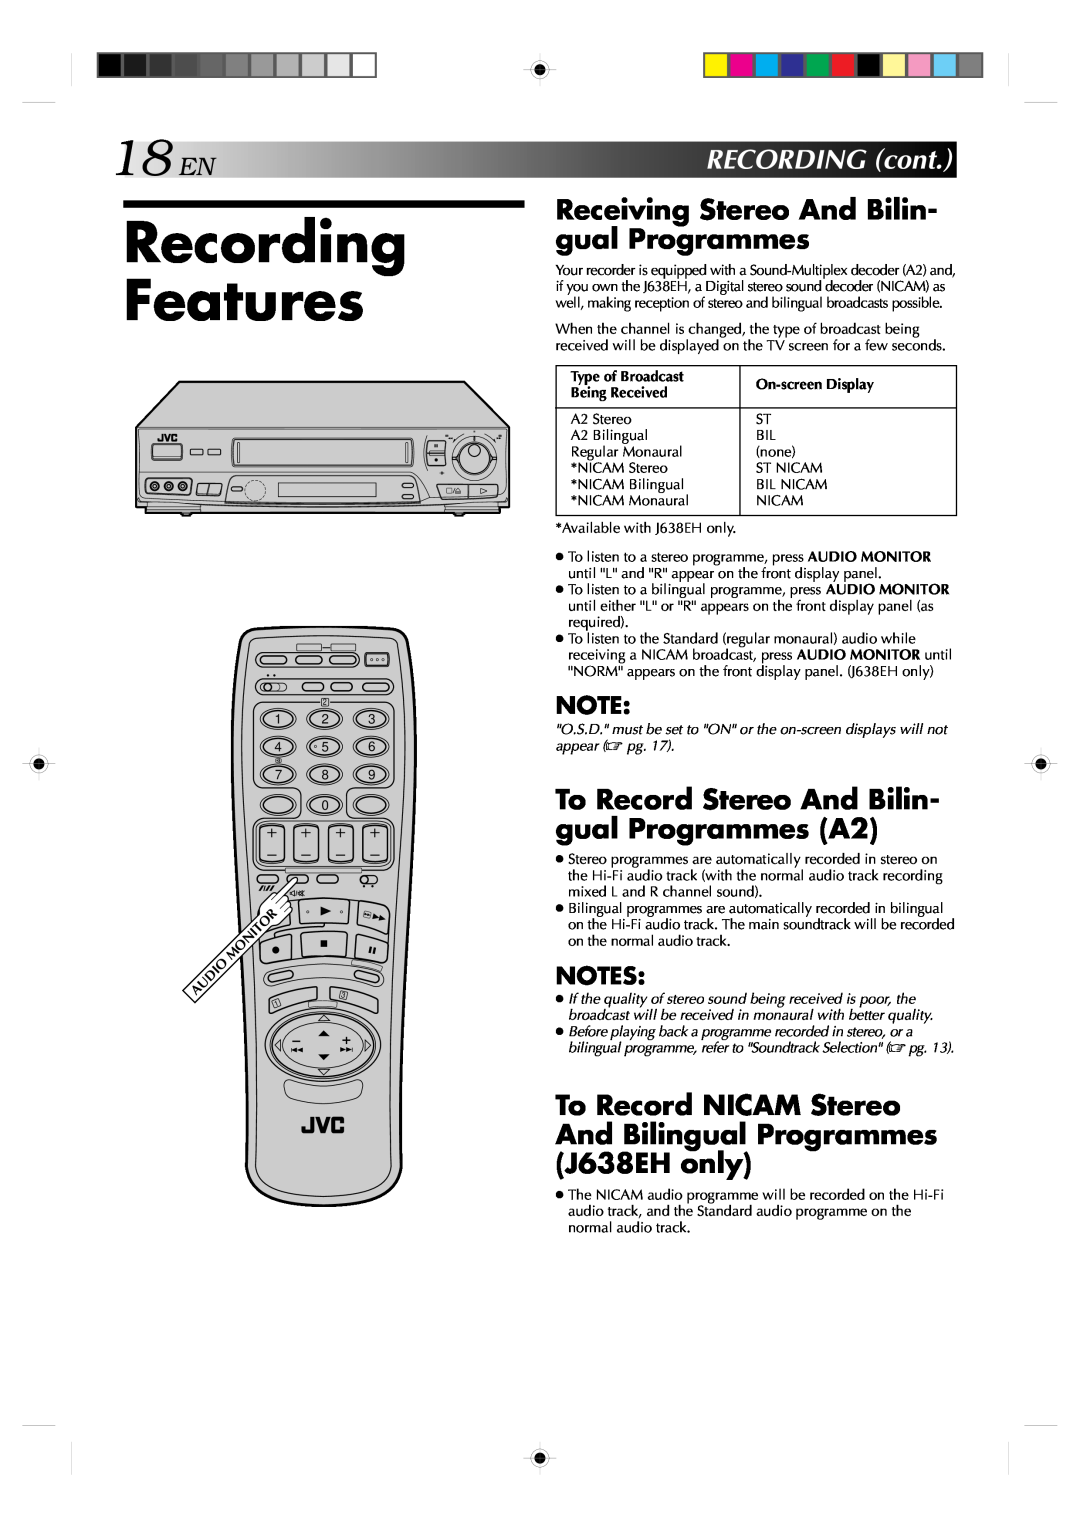 JVC HR-J638E/EH Recording Features, 18ENRECORDINGcont, Receiving Stereo And Bilin- gual Programmes, Type of Broadcast 